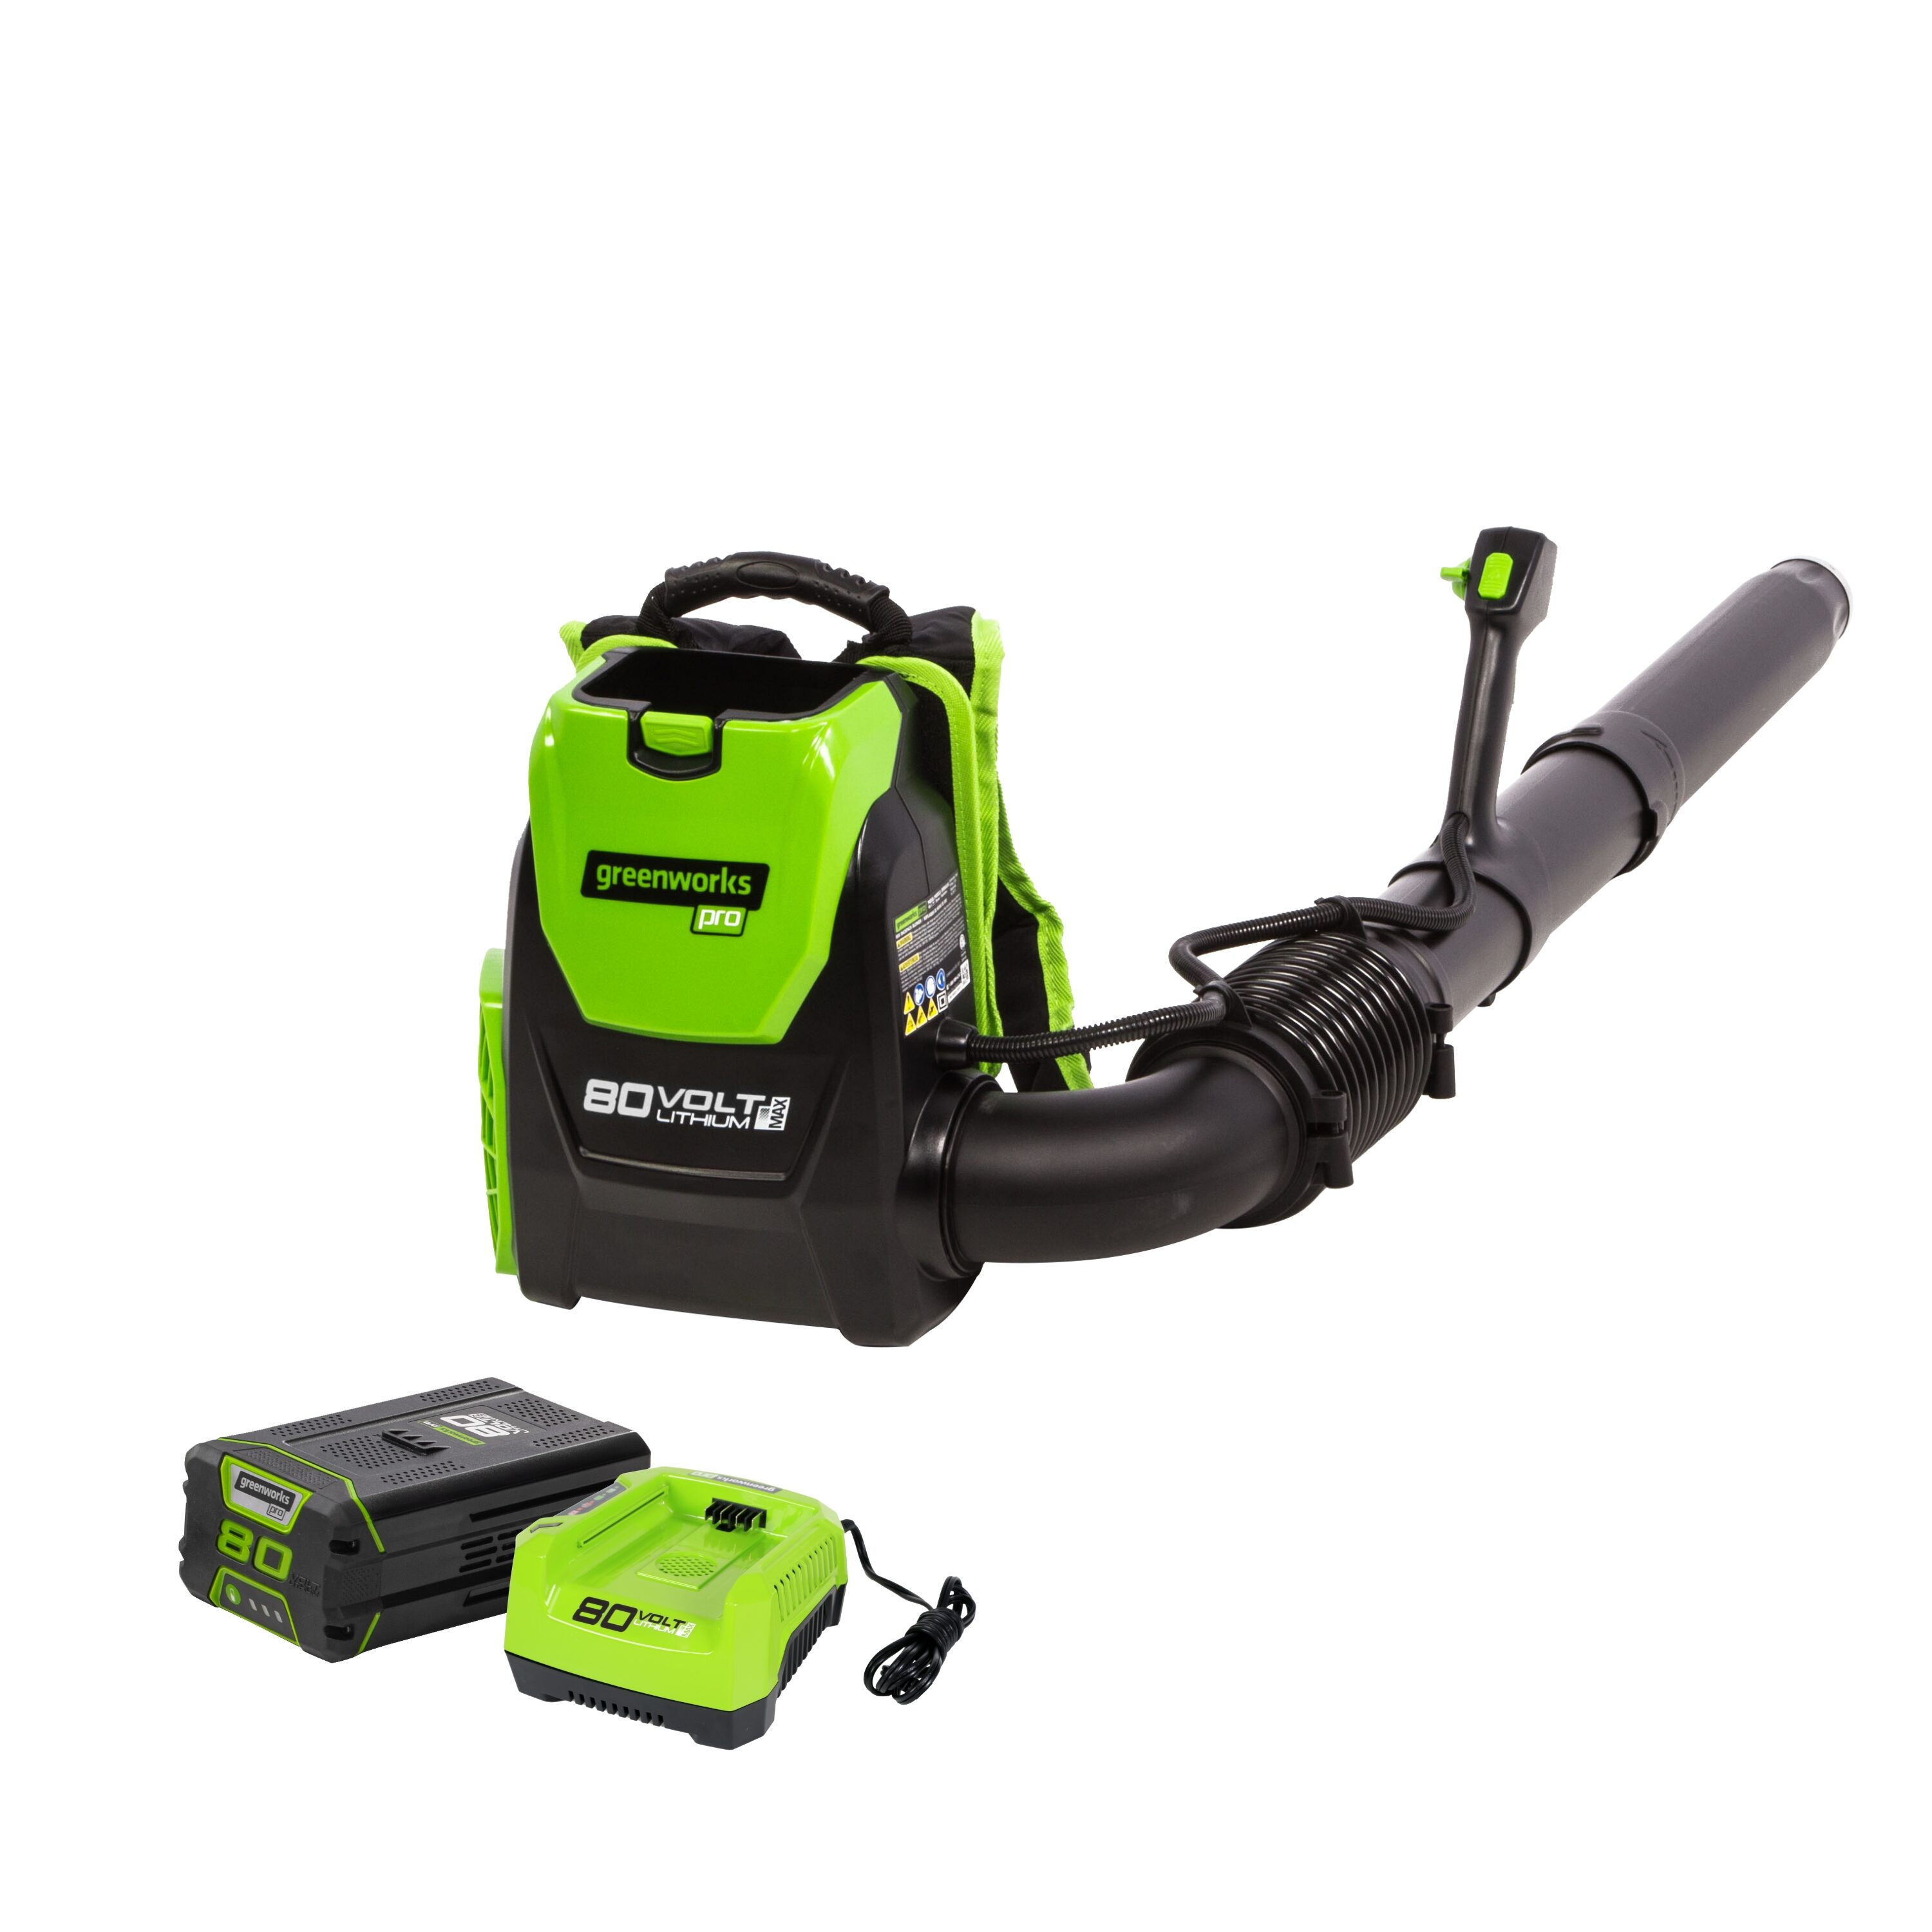 Greenworks Leaf Blowers & Accessories at Lowes.com